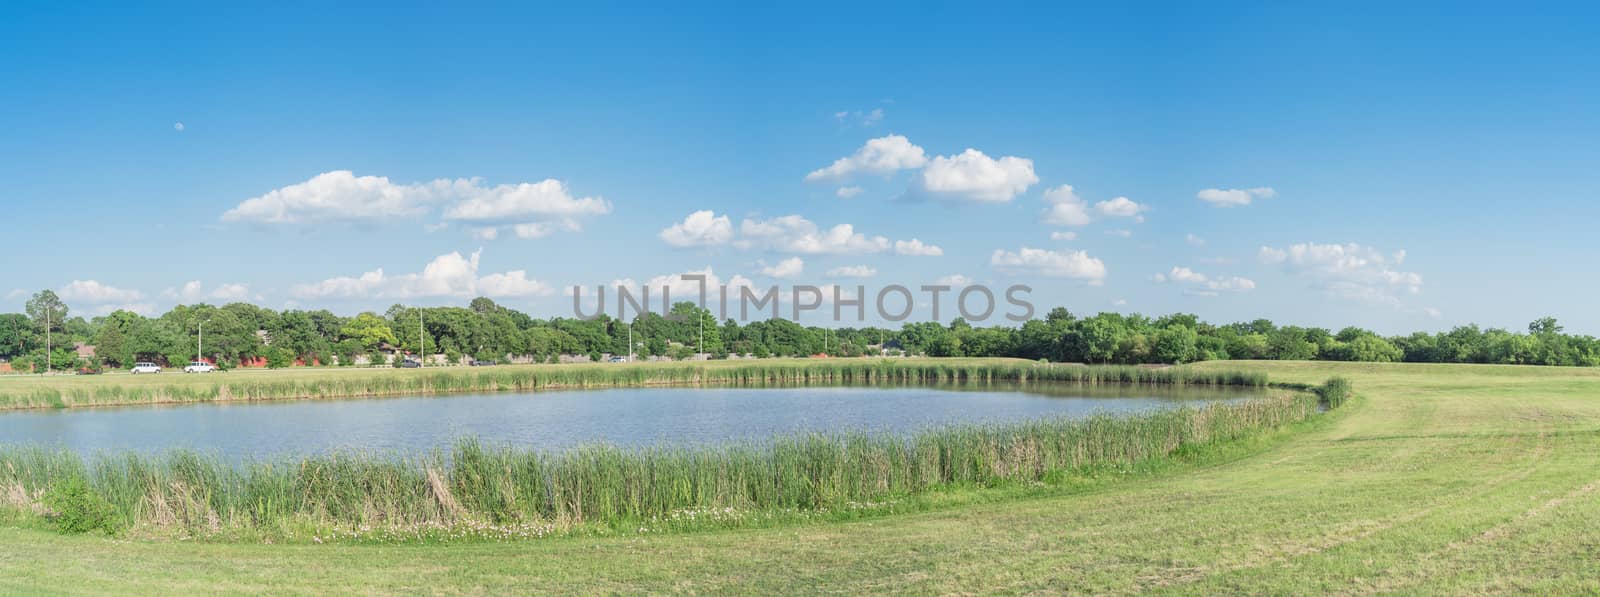 Panoramic hillside lake park with reeds and wildflowers blooming near Dallas, Texas by trongnguyen